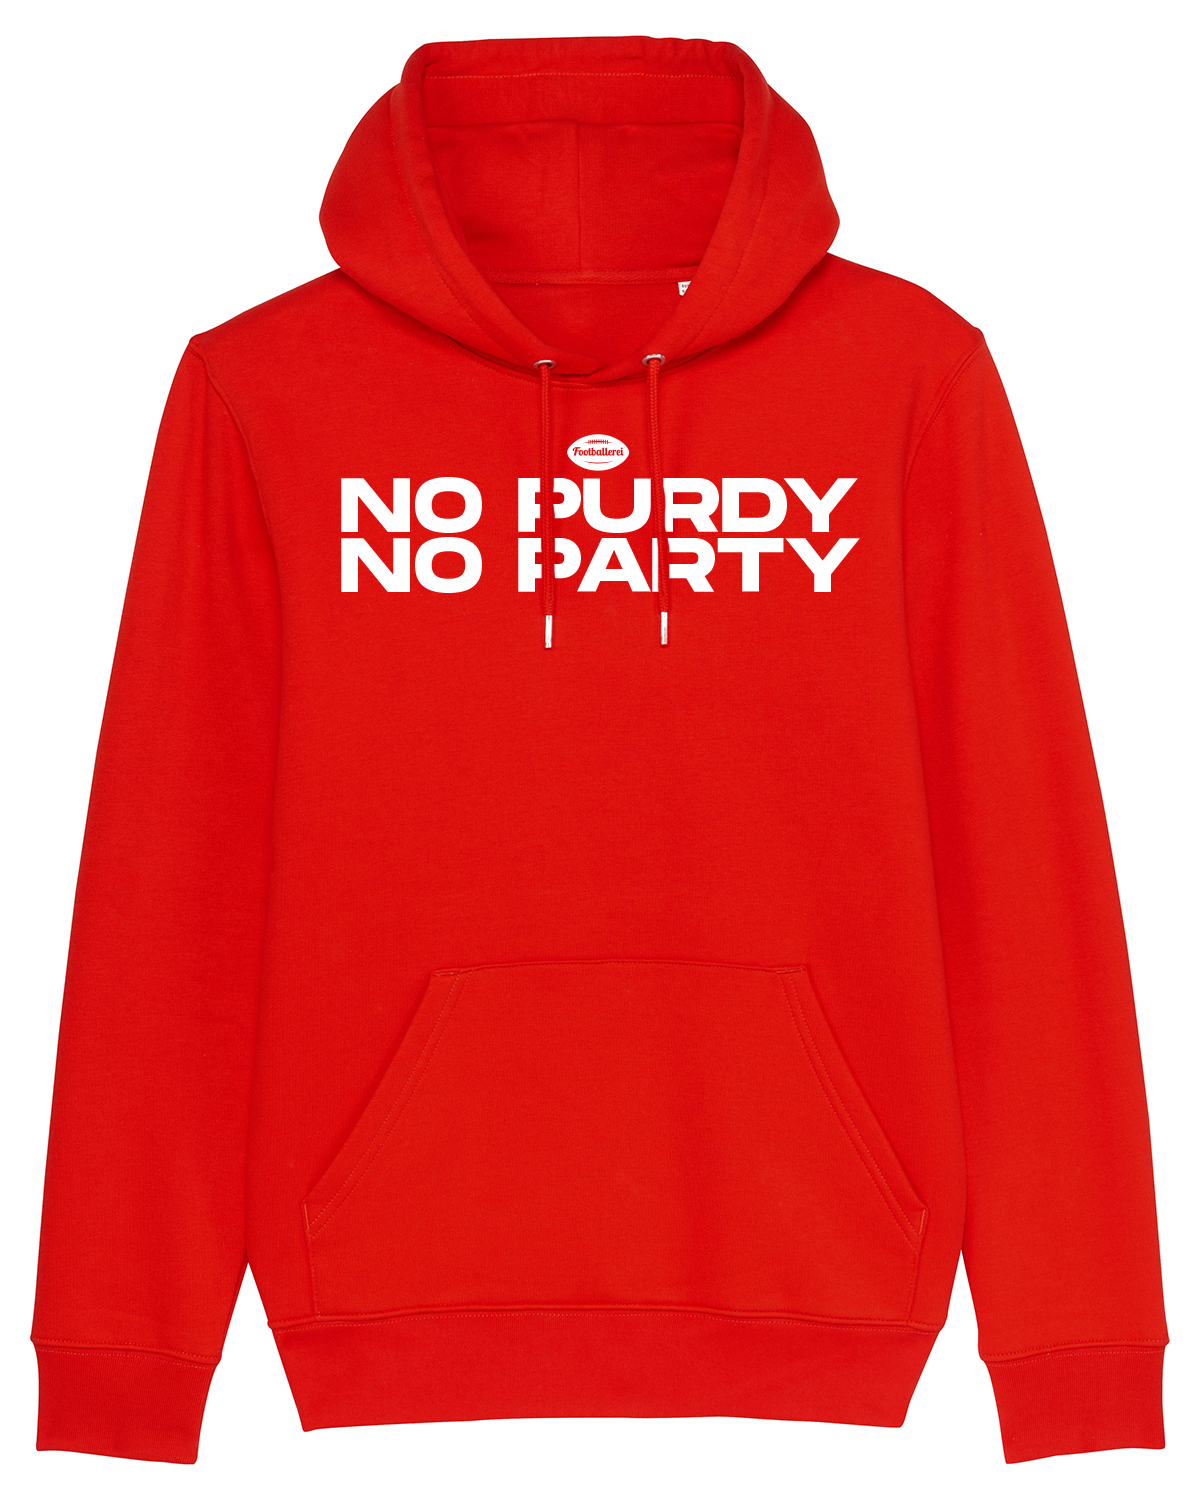 "No Purdy No Party" Hoodie